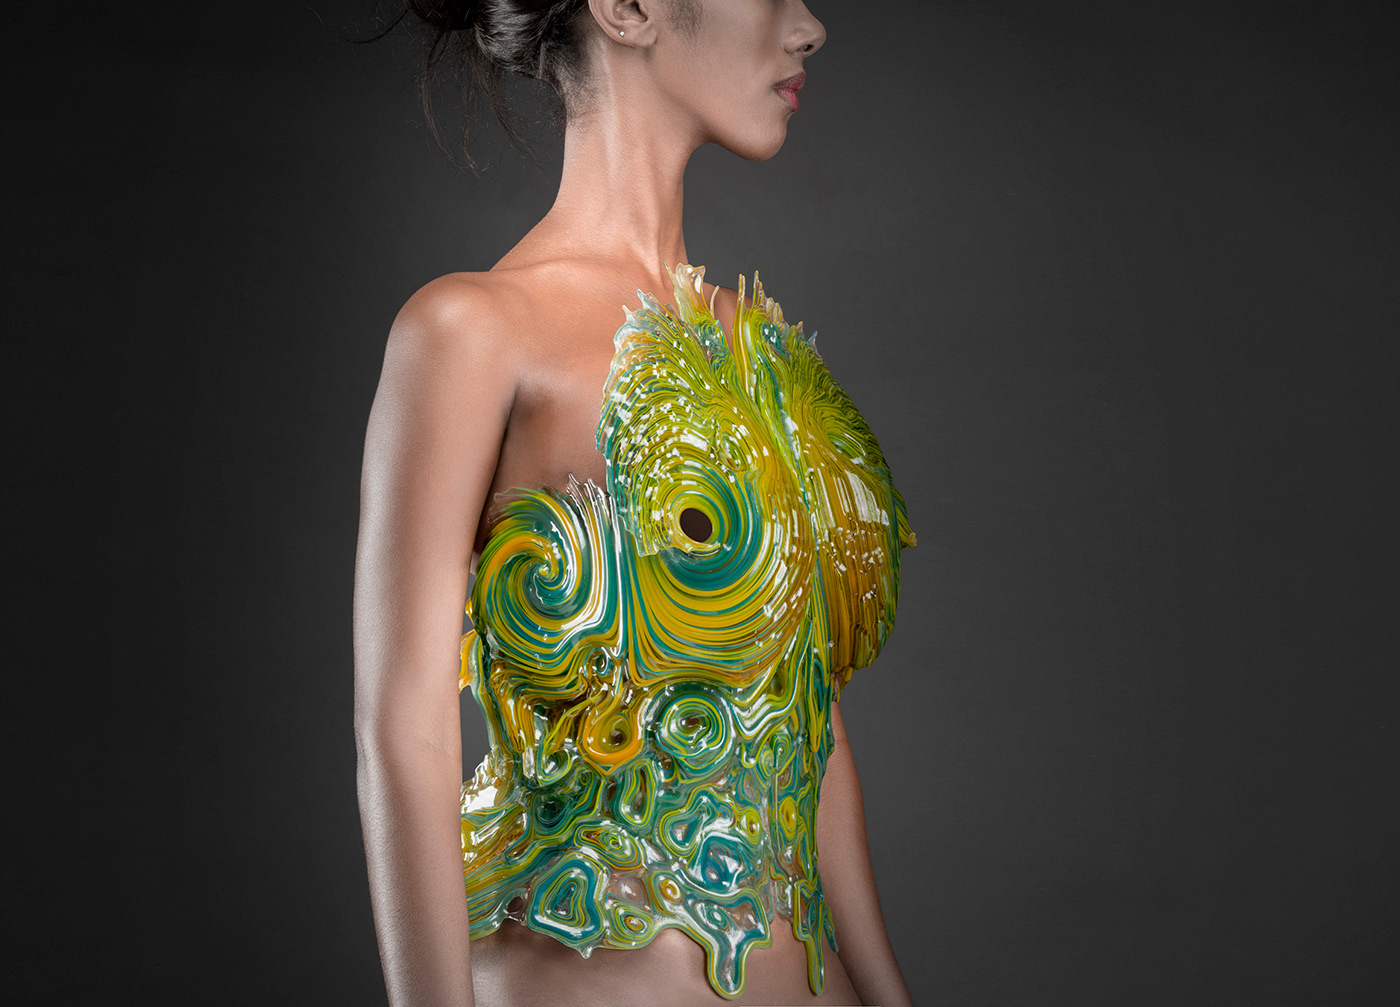 grow growth Growing Structures Neri Oxman MIT Mediated Matter stratasys 3d printing simulation Artifical Life synthetic biology generative art